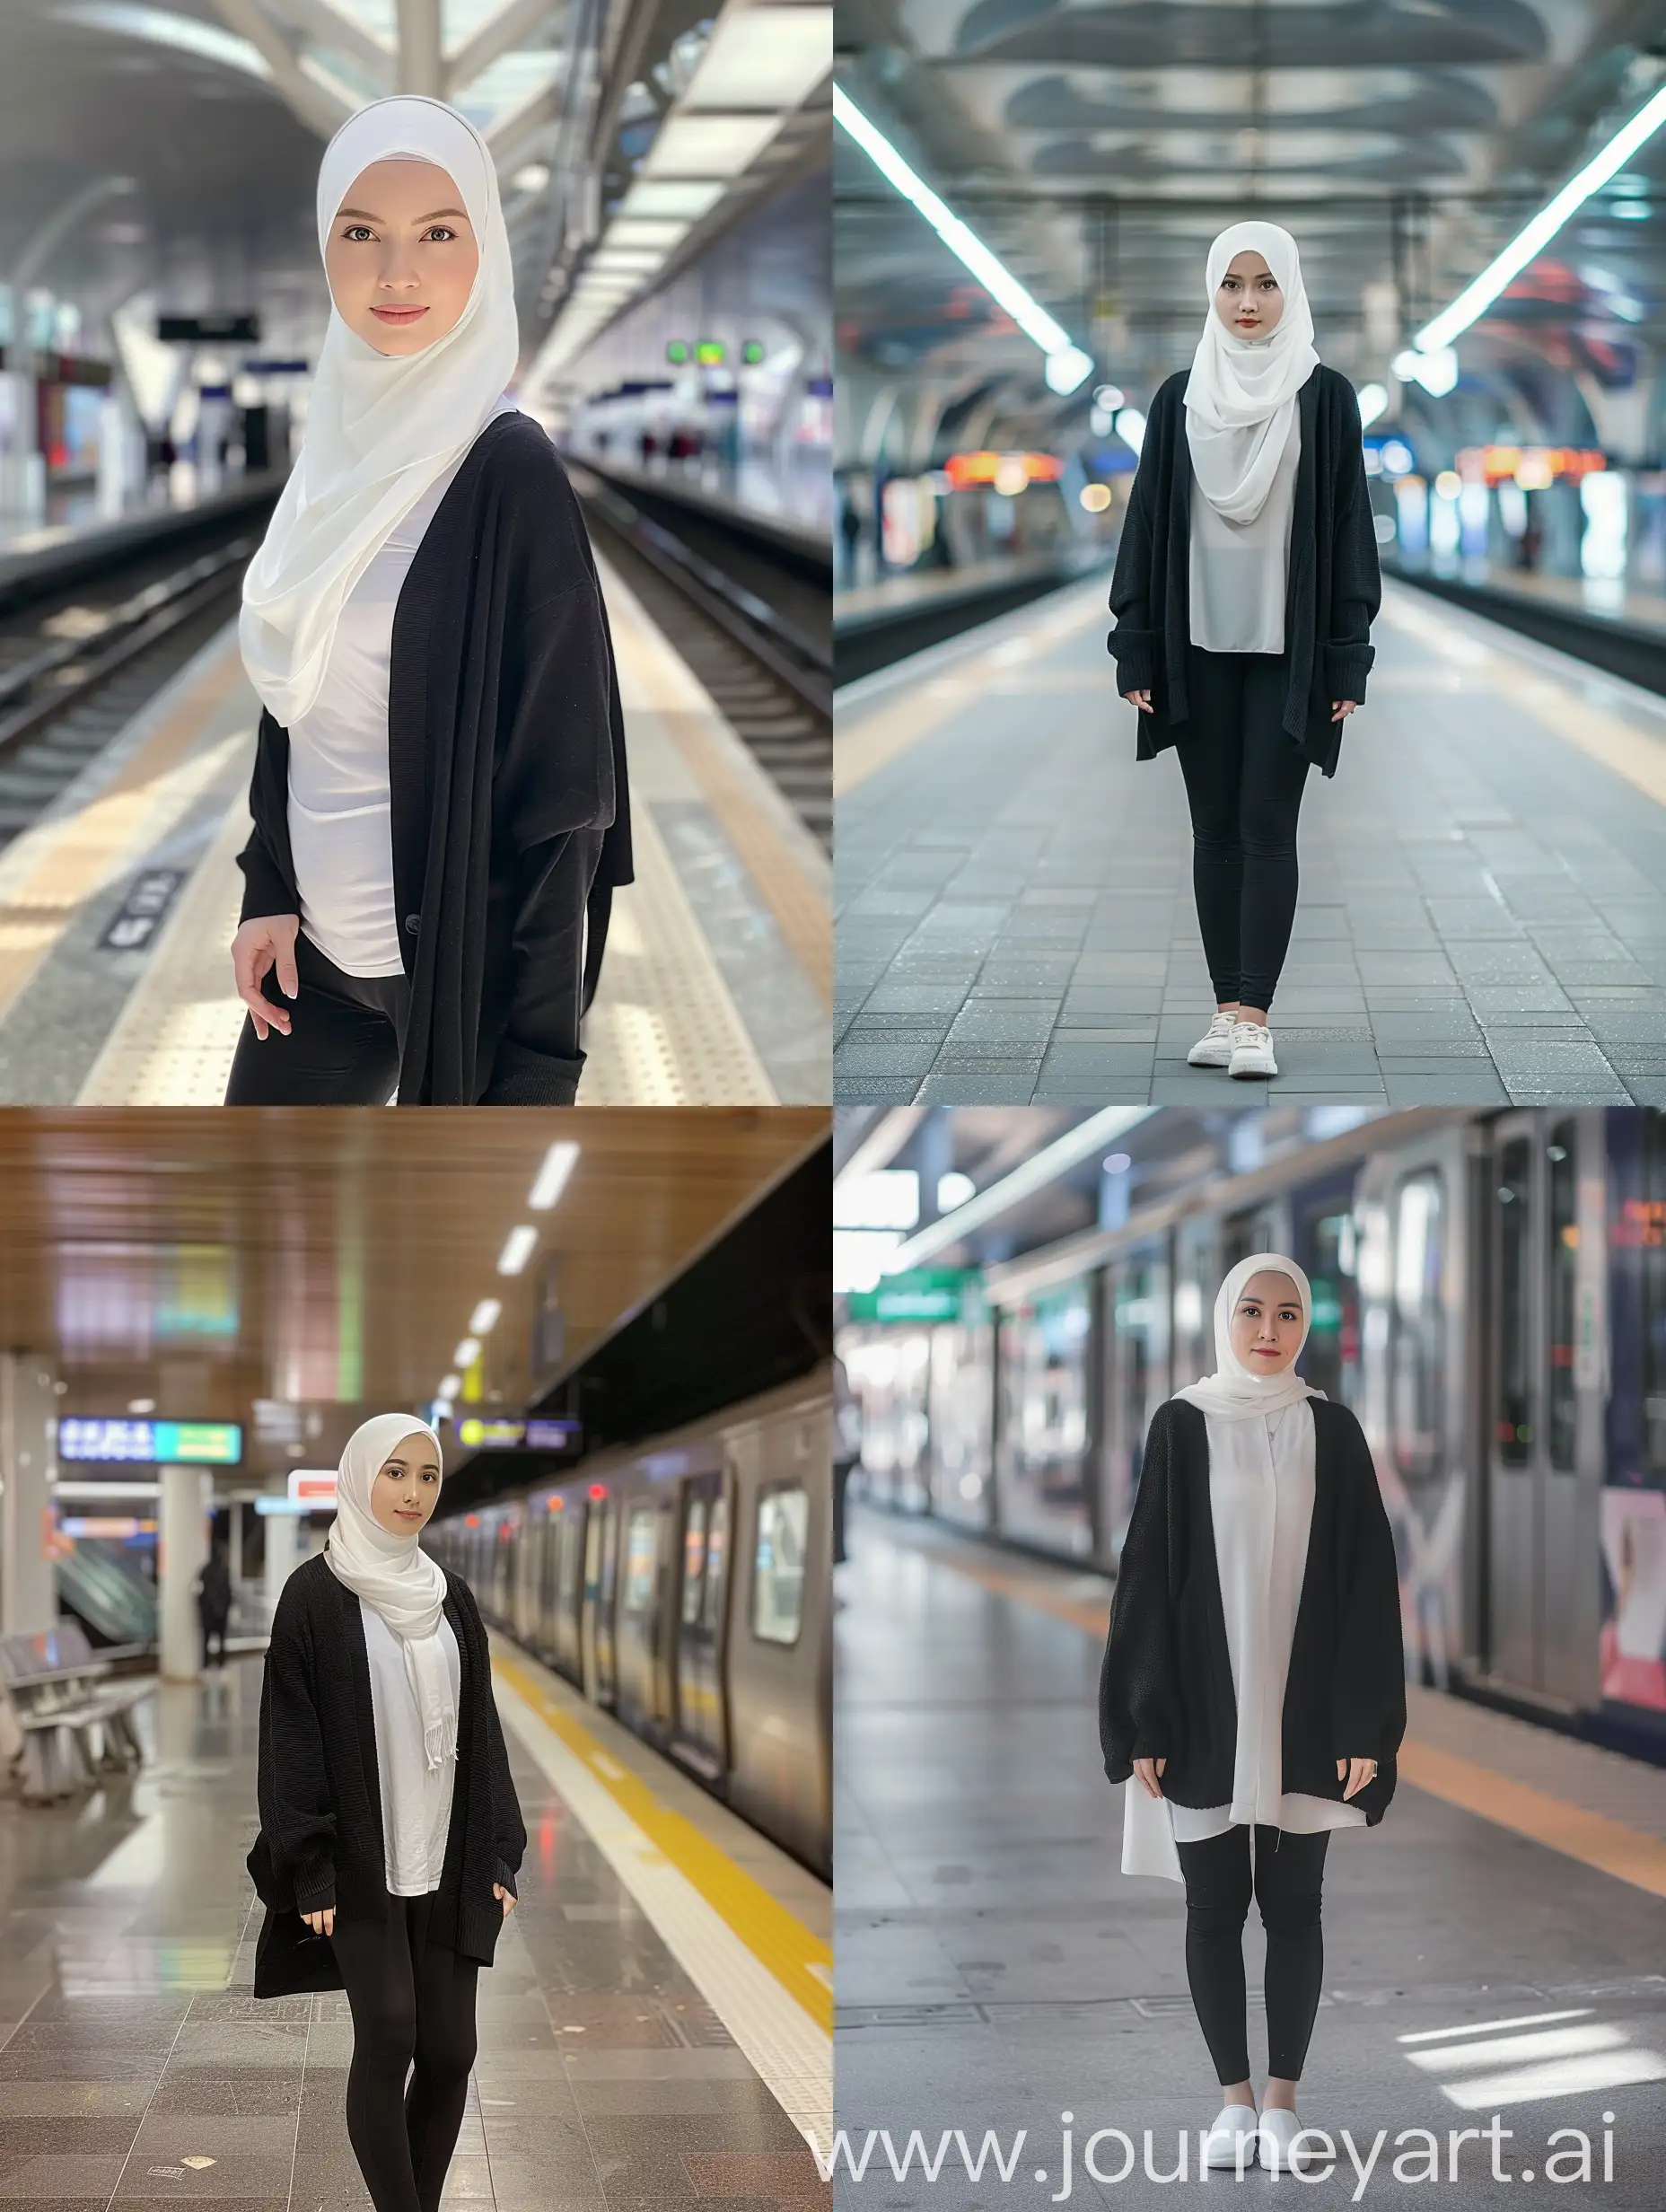 An indonesian woman wearing white hijab, wearing black cardigan, and wearing black legging pants. Standing in a train station